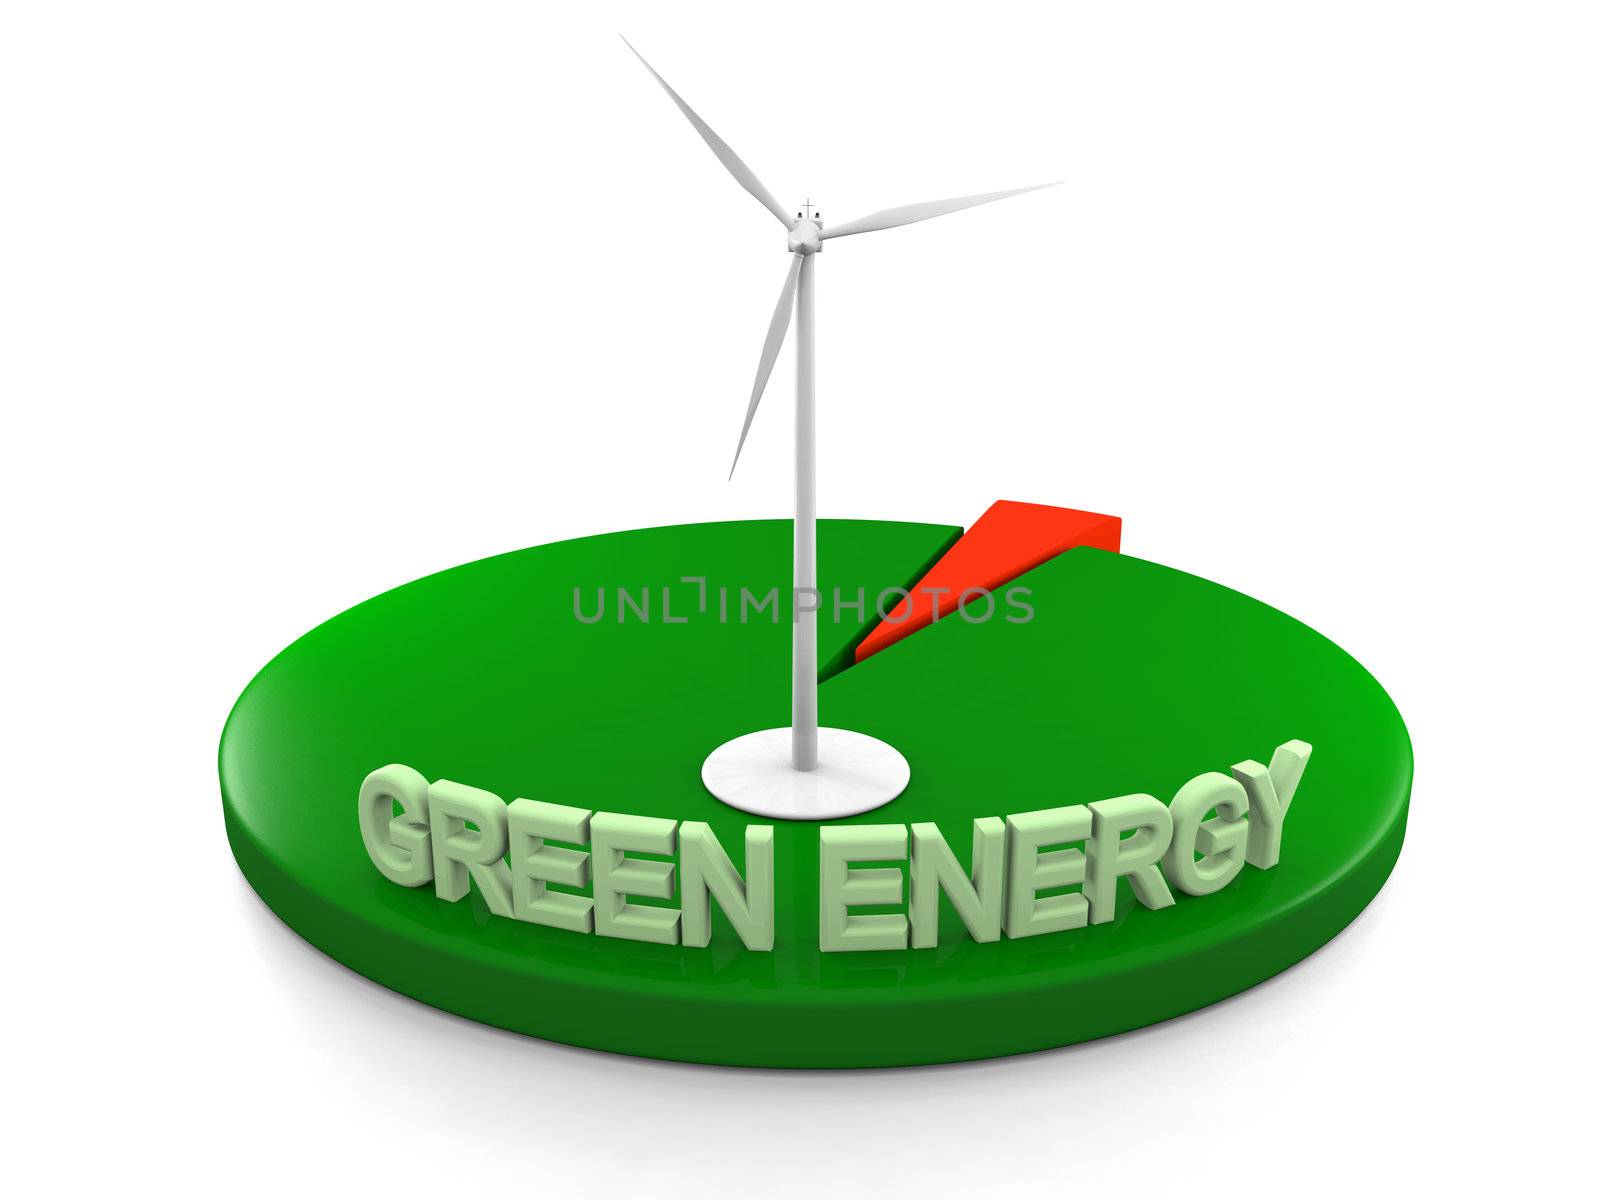 Green energy by Harvepino